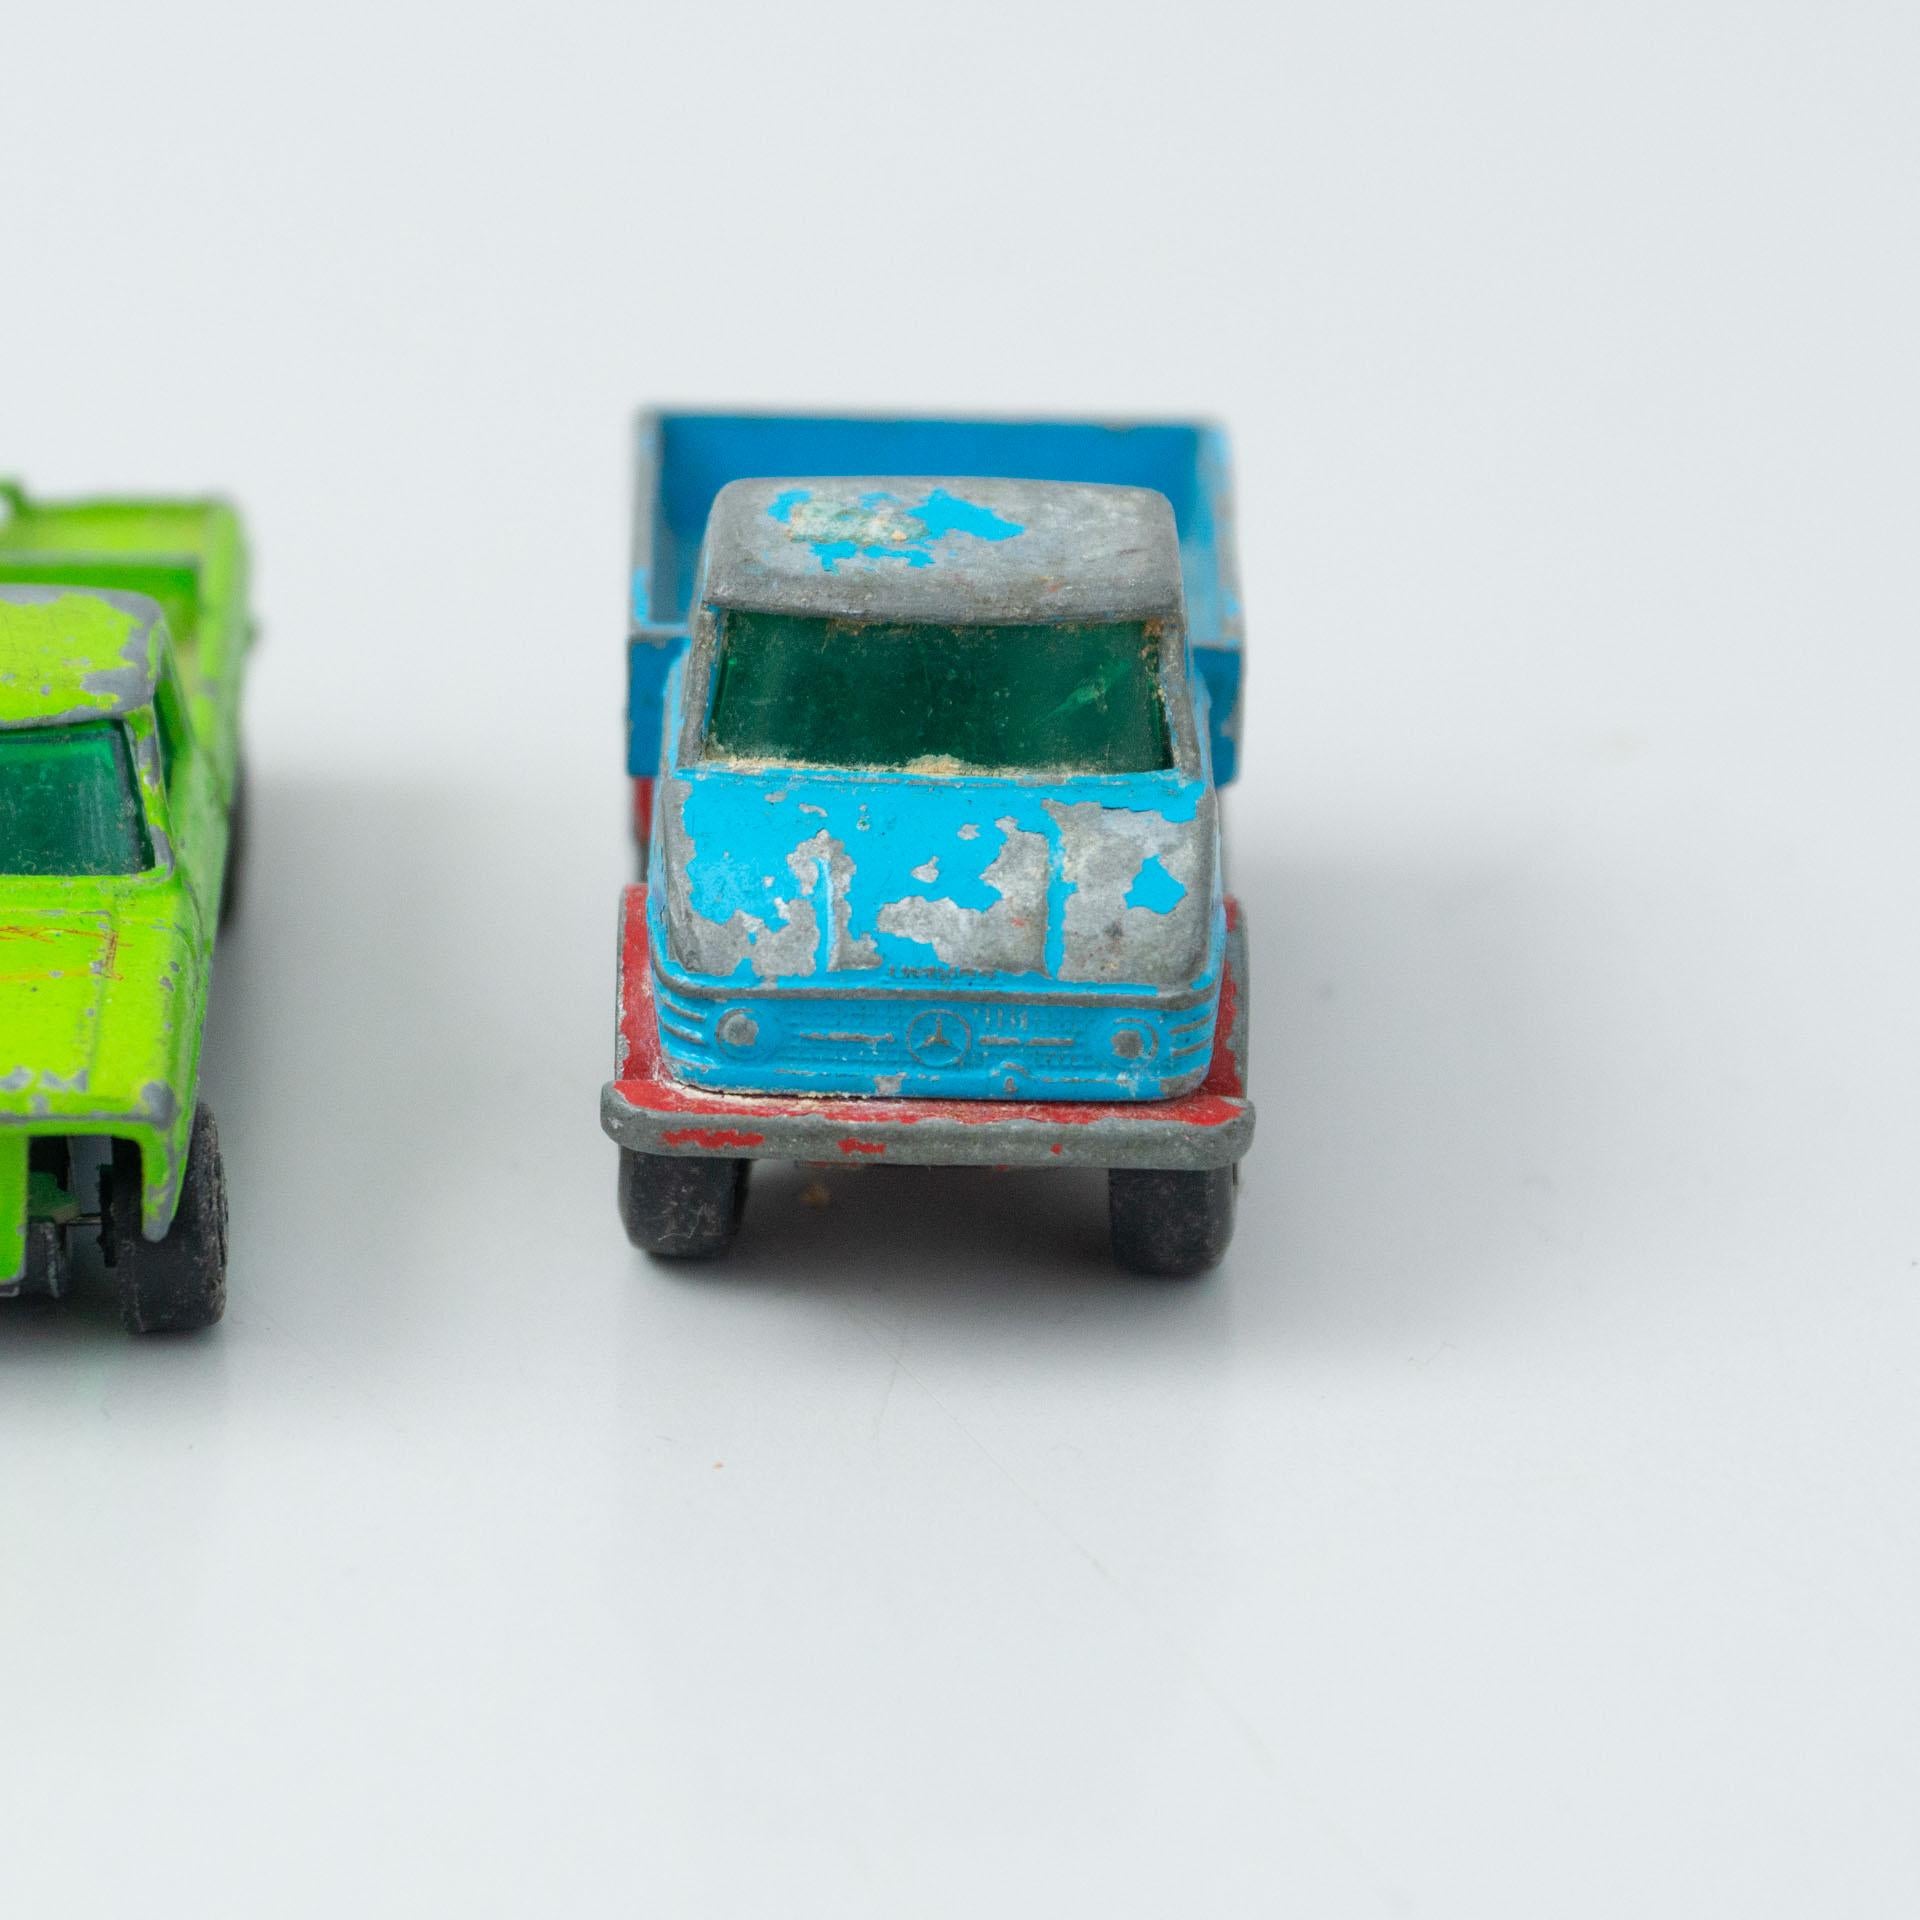 Set of Three Vintage Toy MatchBox Cars, circa 1960 In Good Condition For Sale In Barcelona, Barcelona